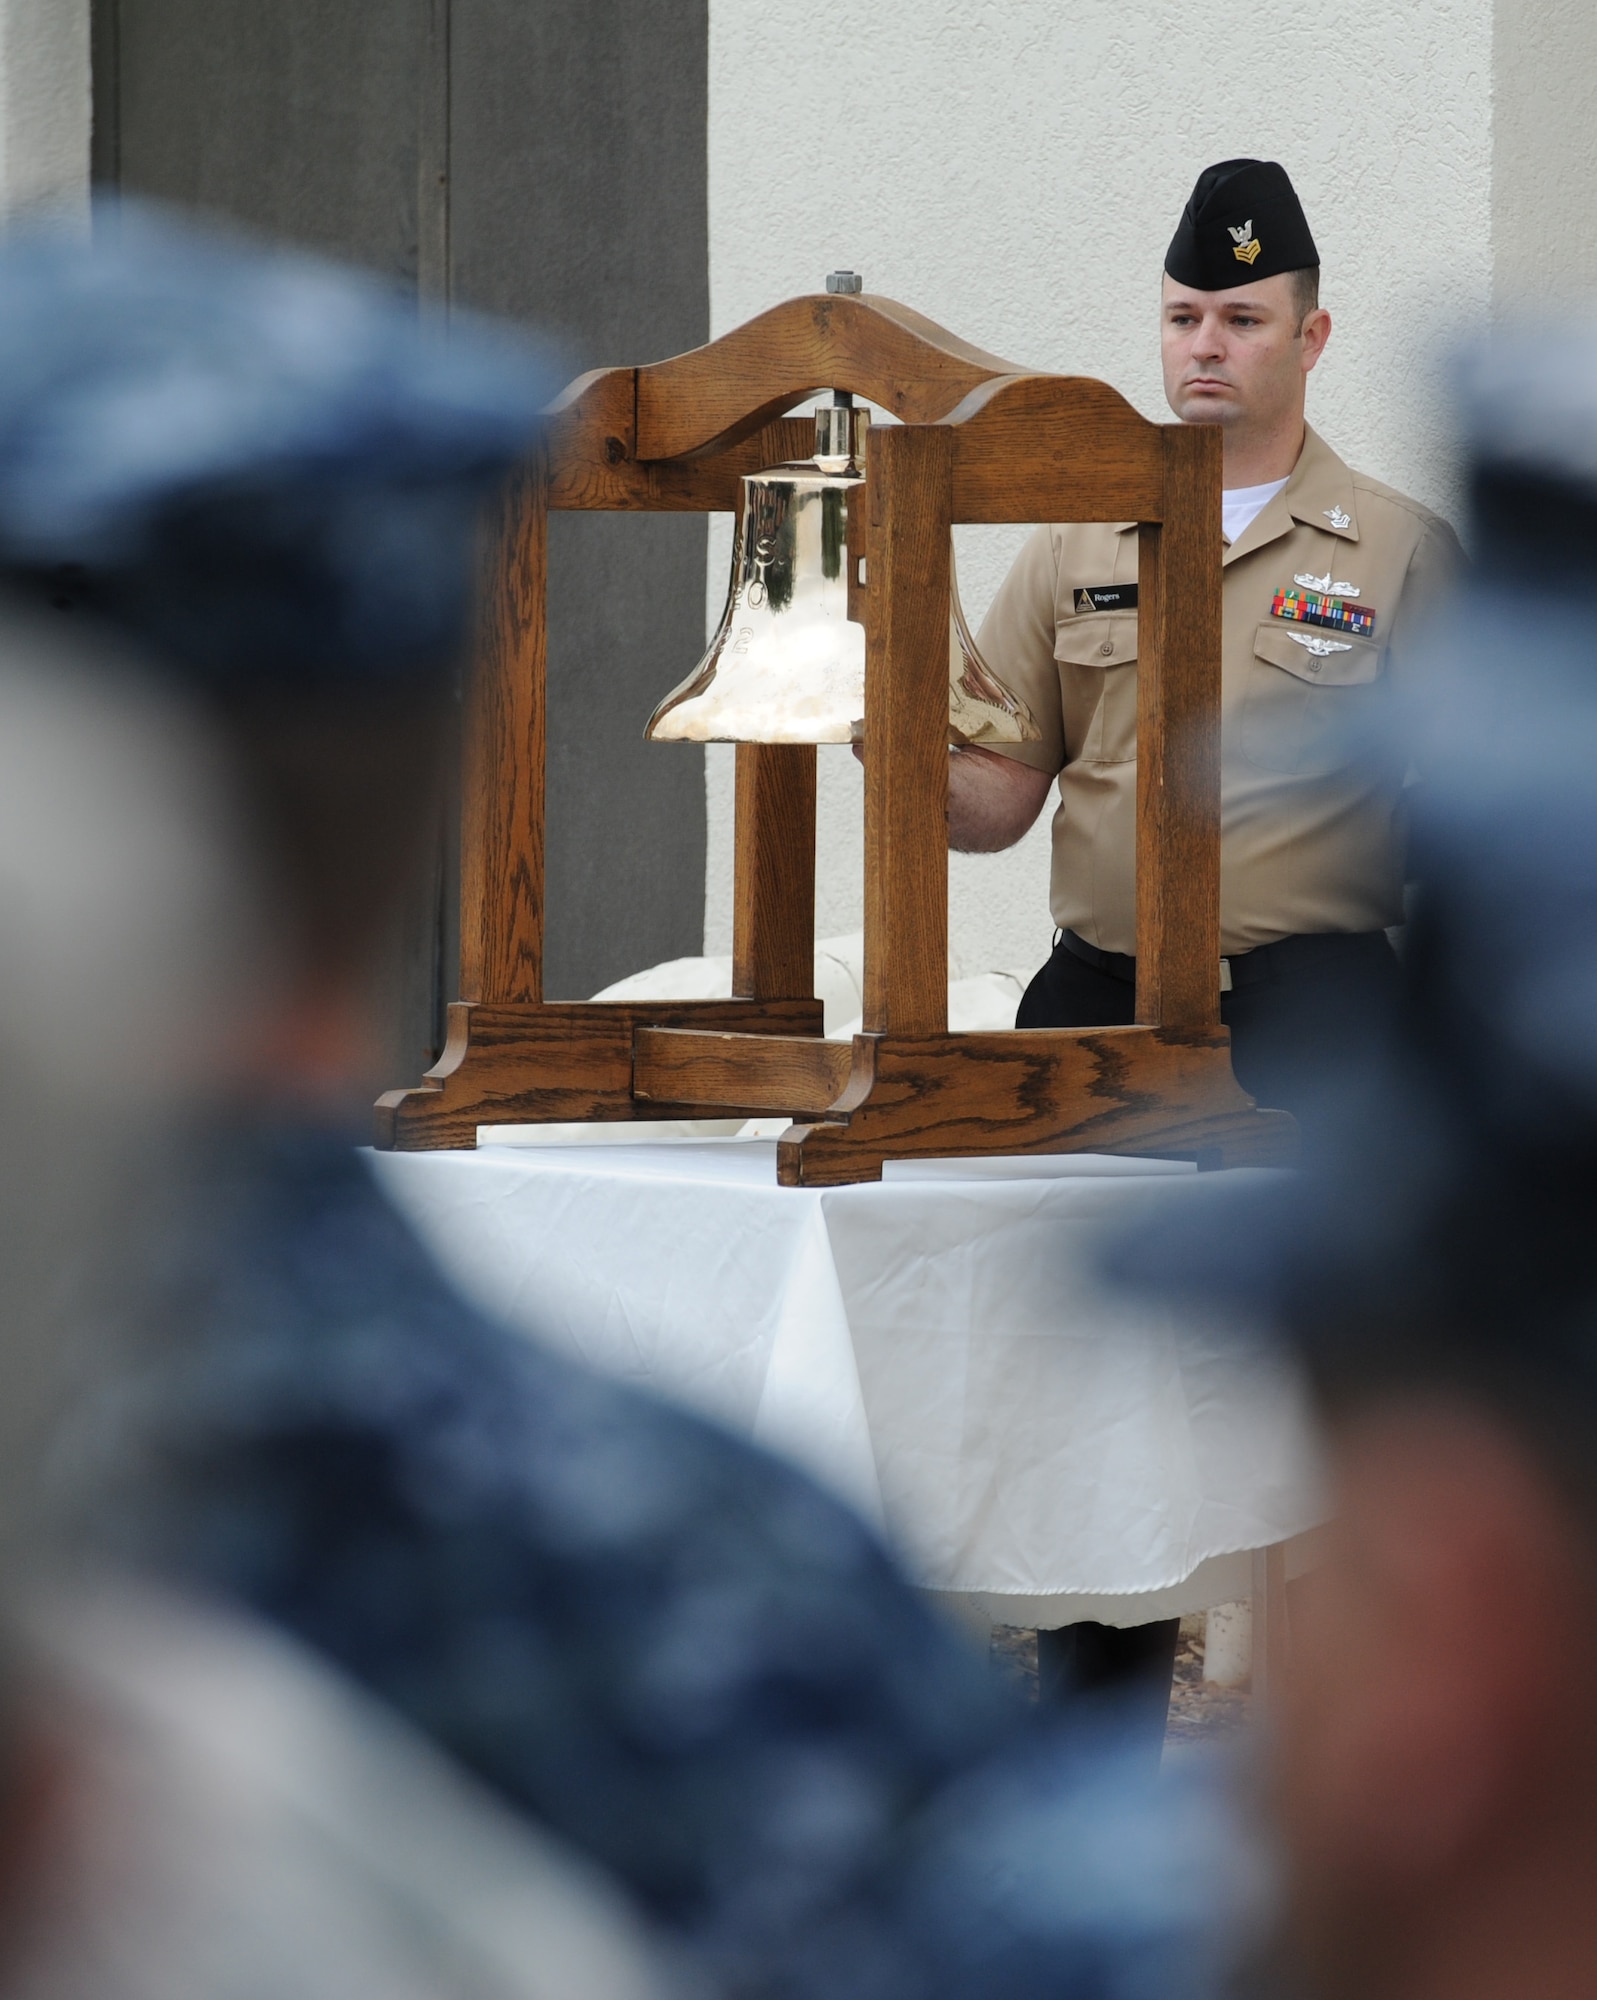 U.S. Navy Petty Officer 1st Class James Rogers, Center for Naval Aviation Technical Training Unit Keesler instructor, rings a bell in memory of every ship destroyed during the attacks on Pearl Harbor at a CNATTU Keesler Pearl Harbor 75th Anniversary Remembrance Ceremony in front of Allee Hall Dec. 7, 2016, on Keesler Air Force Base, Miss. More than 100 Keesler personnel attended the event to honor those lost in the Dec. 7, 1941 Pearl Harbor attacks. (U.S. Air Force photo by Kemberly Groue)